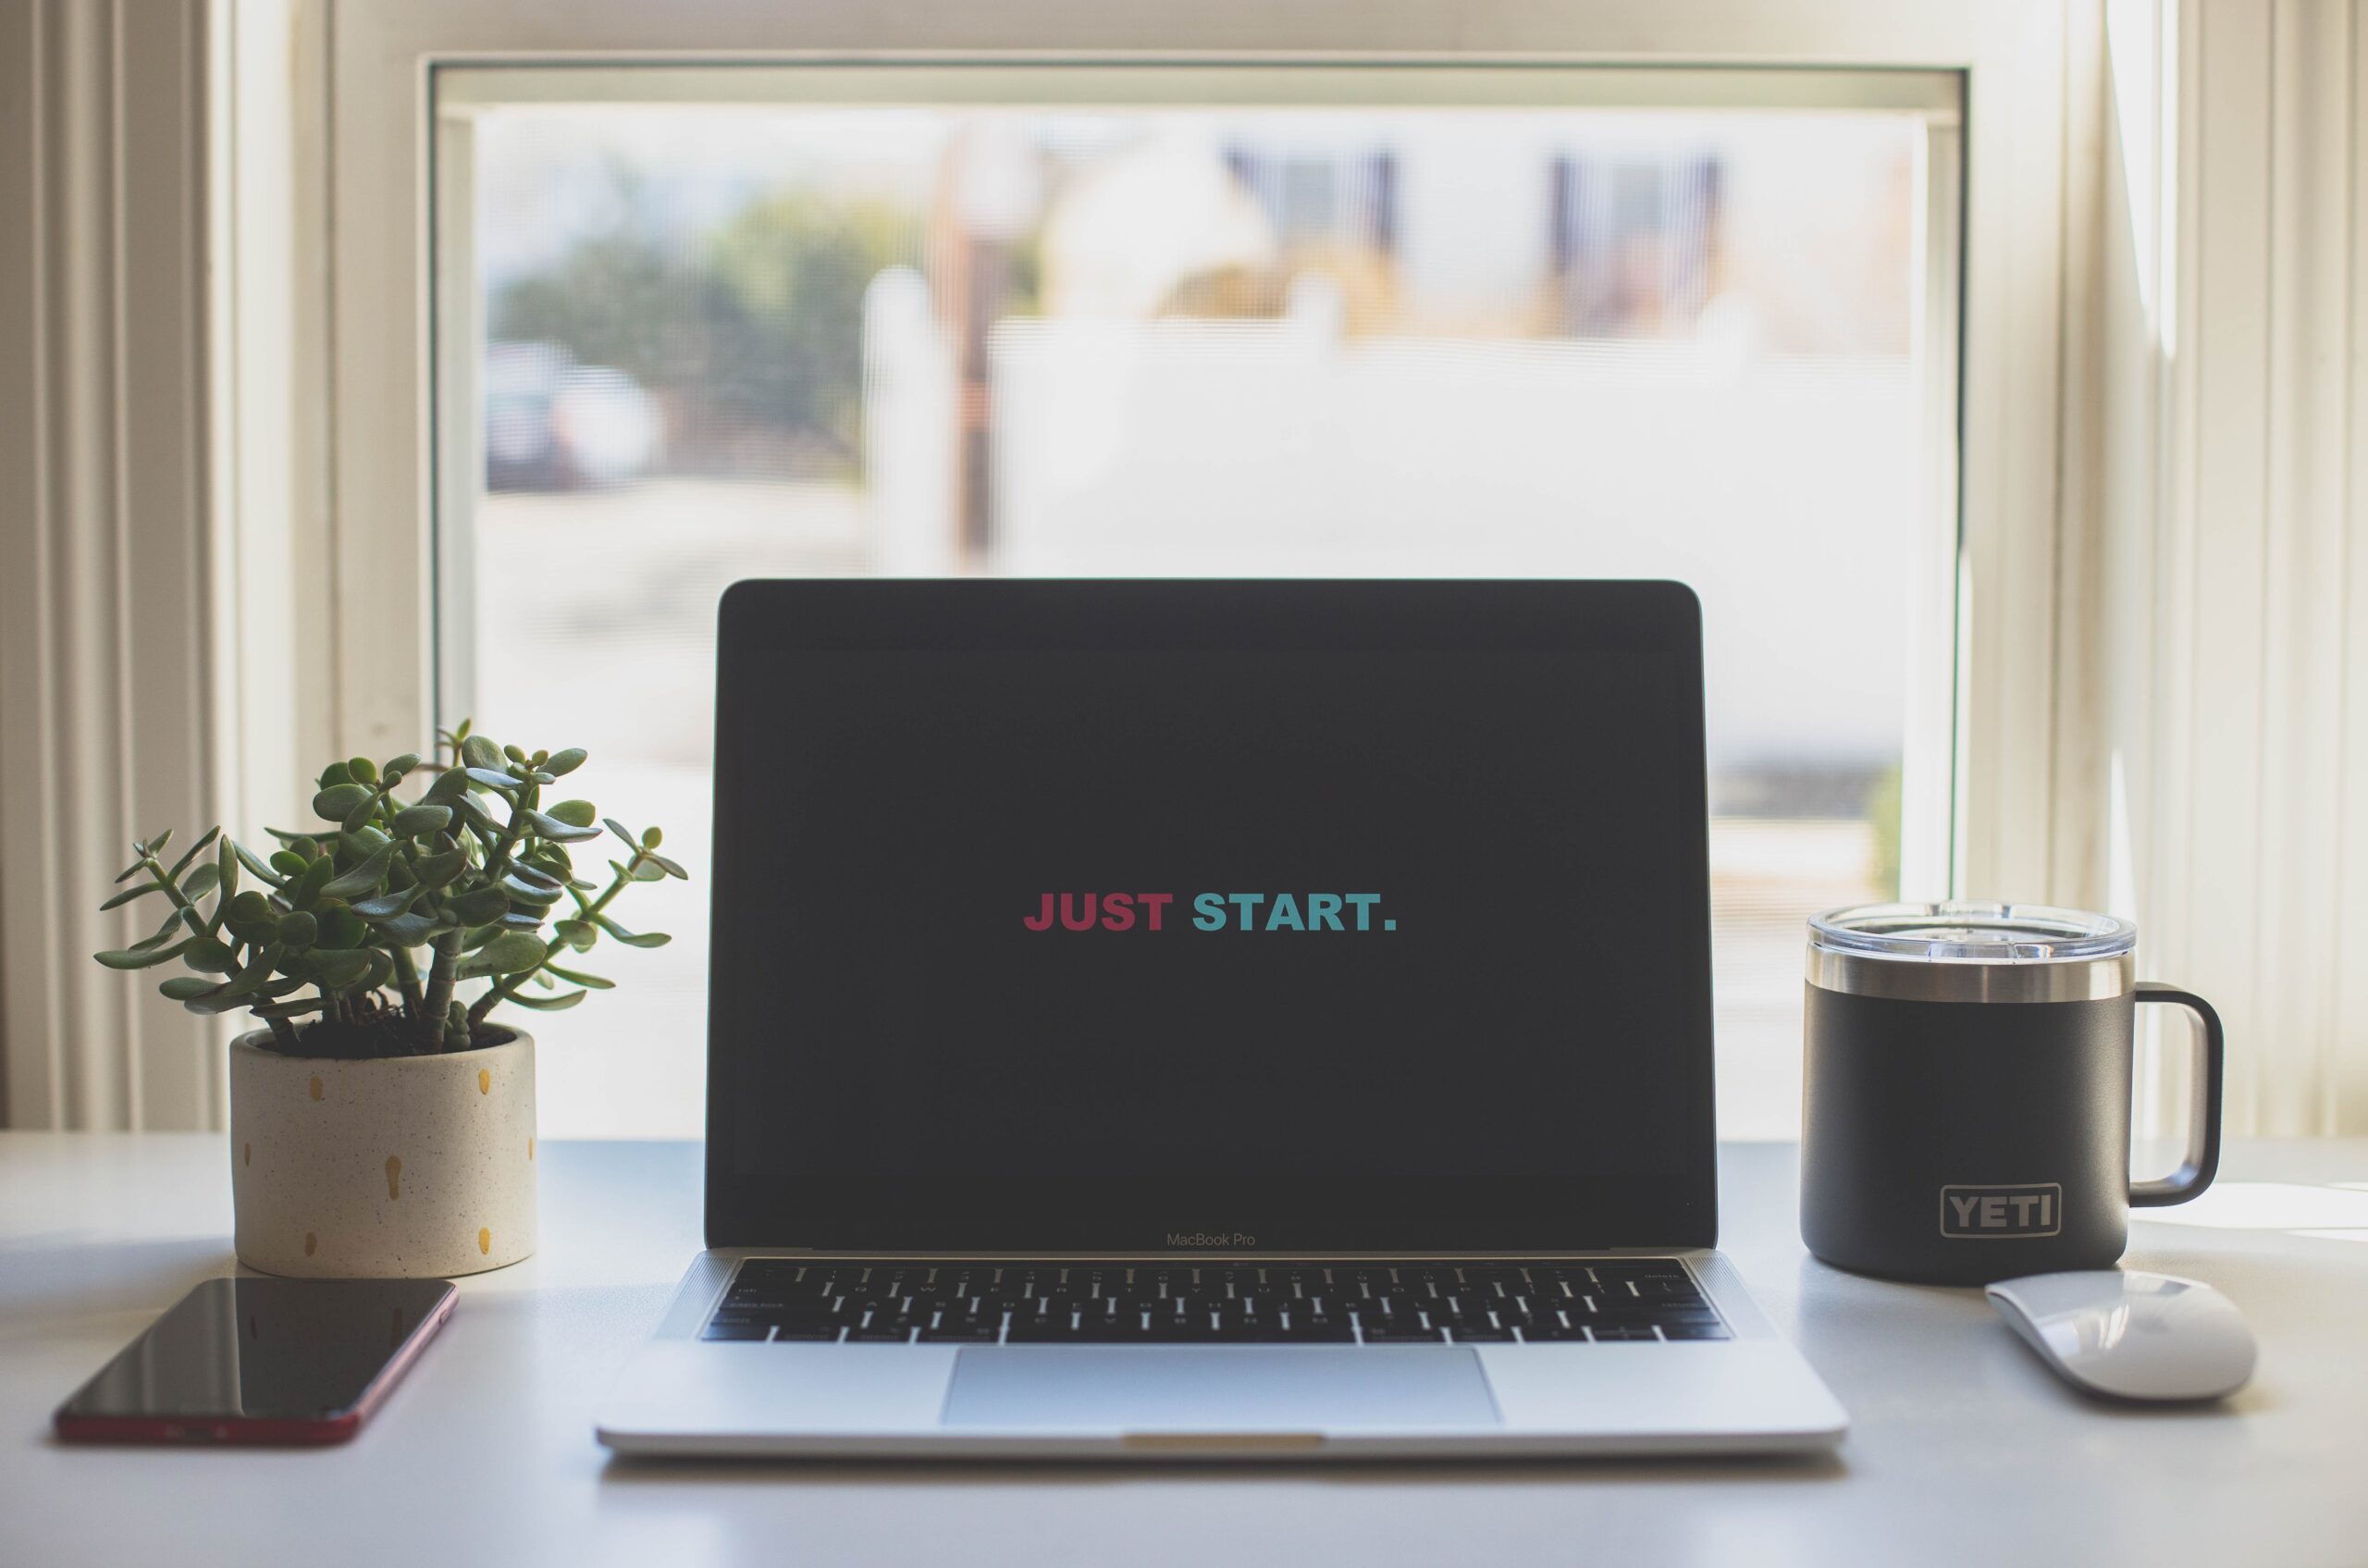 A laptop with the words "Just Start." on the screen